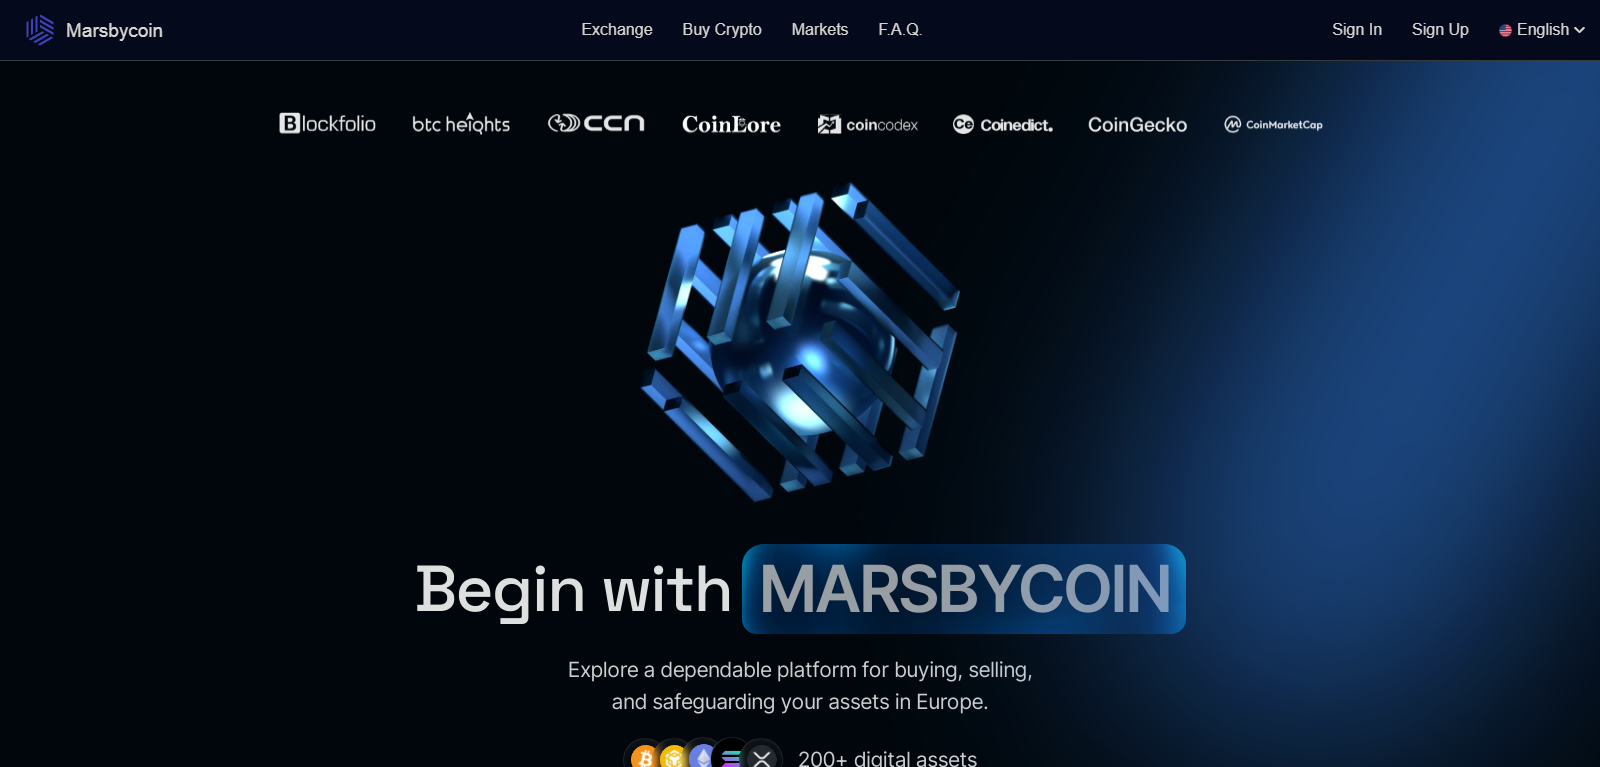 Marsbycoin.com Scam Trading Website Reviews: Don’t Invest Here!